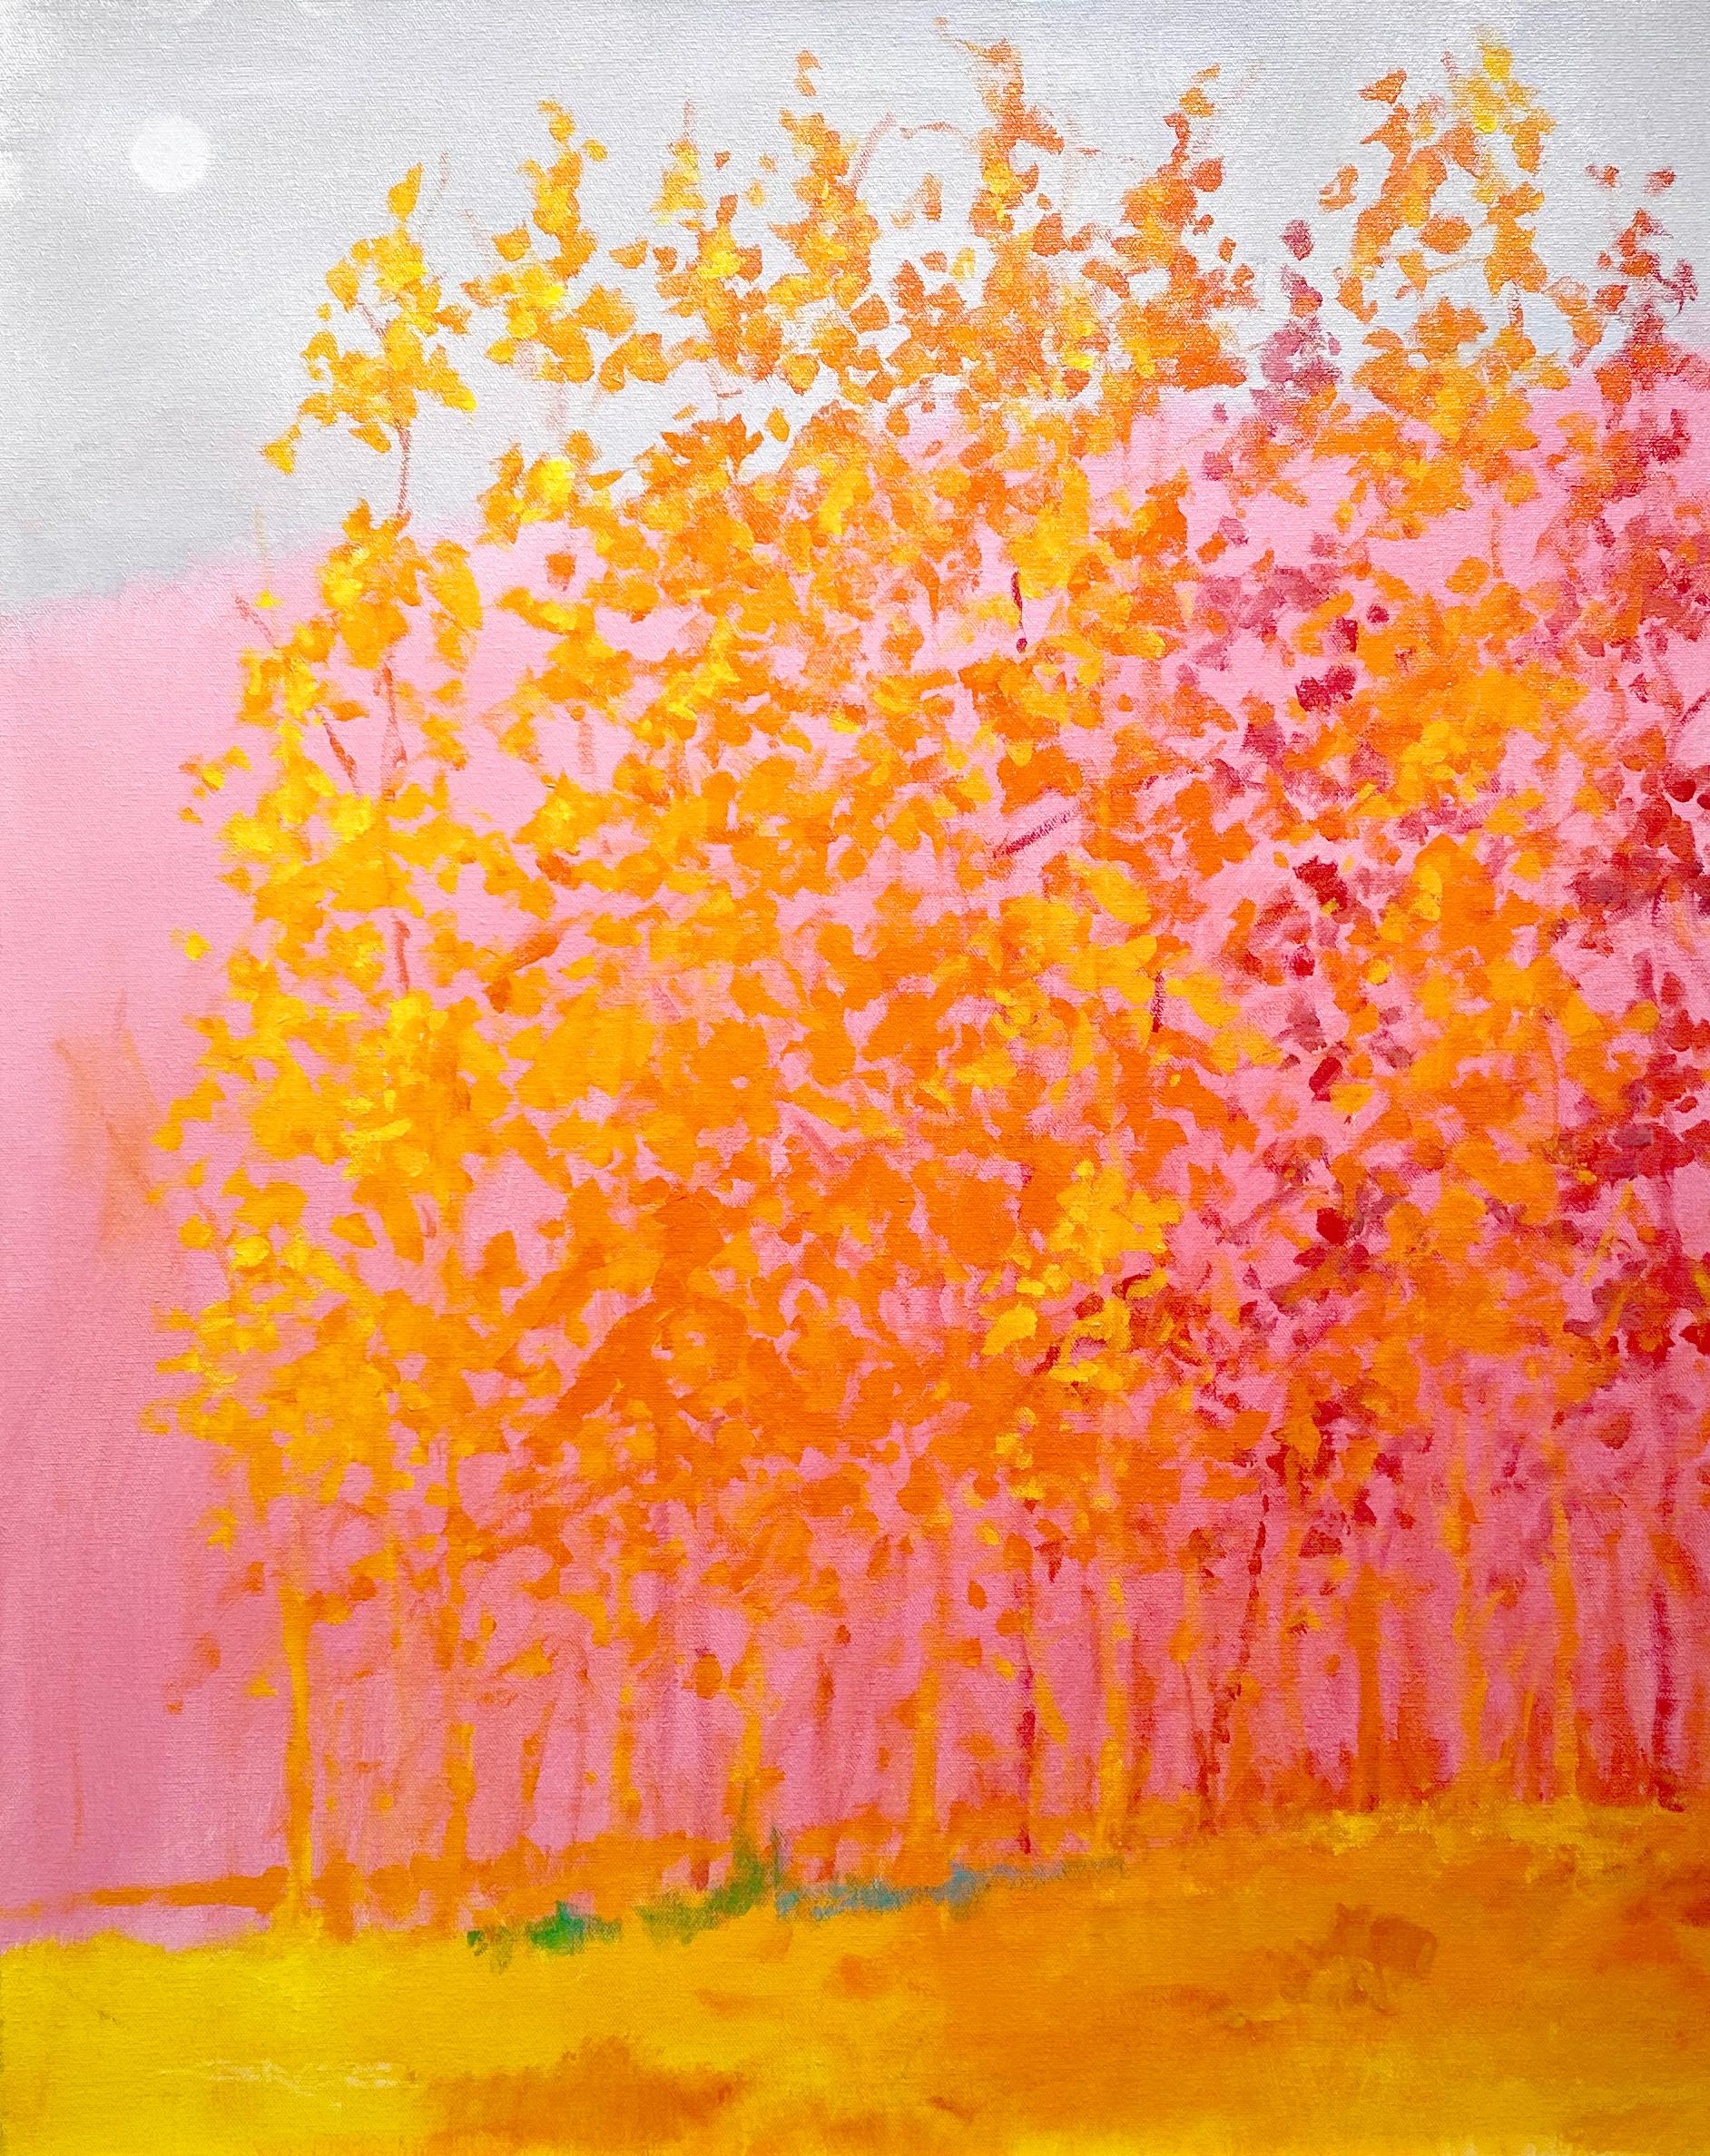 C.E. Ross, "Pink Passion", Colorful Abstract Forest Landscape Acrylic on Canvas